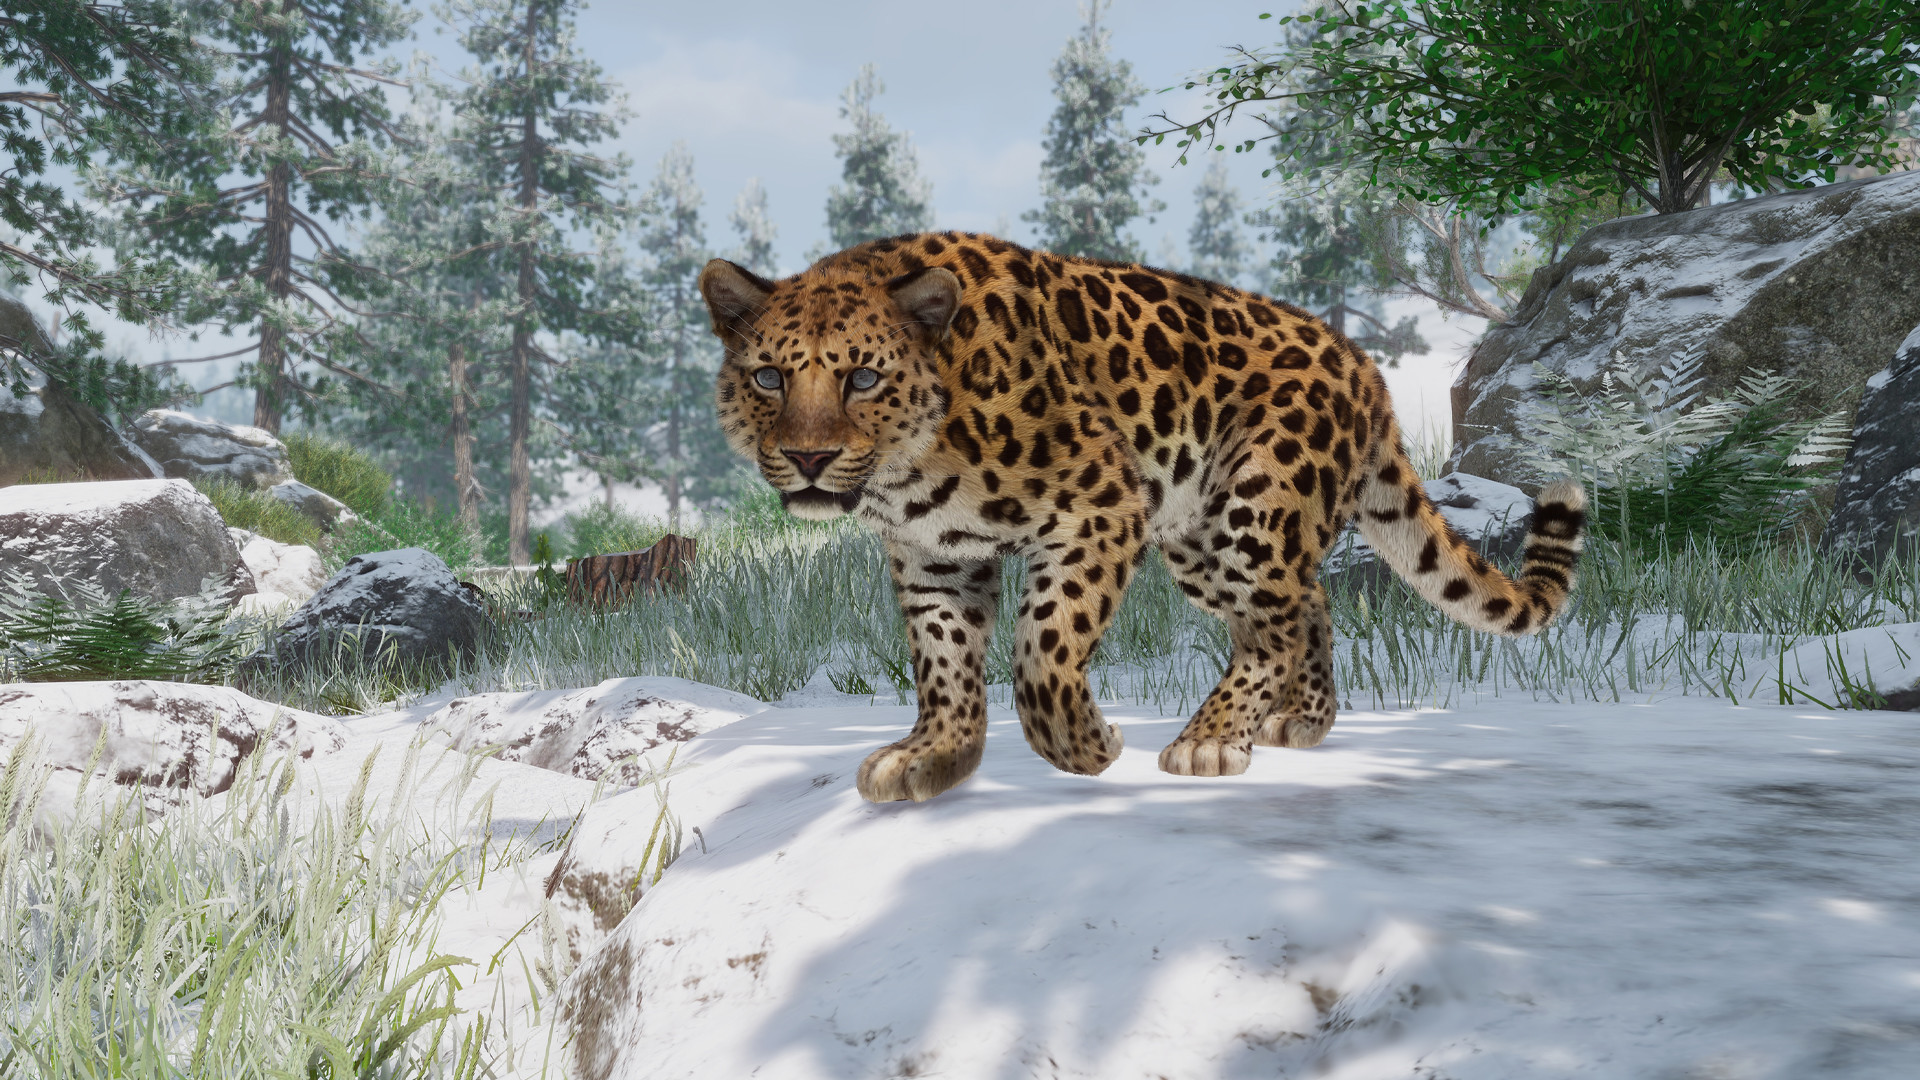 Planet Zoo gets axolotls, leopards, and more in new Conservation Pack DLC